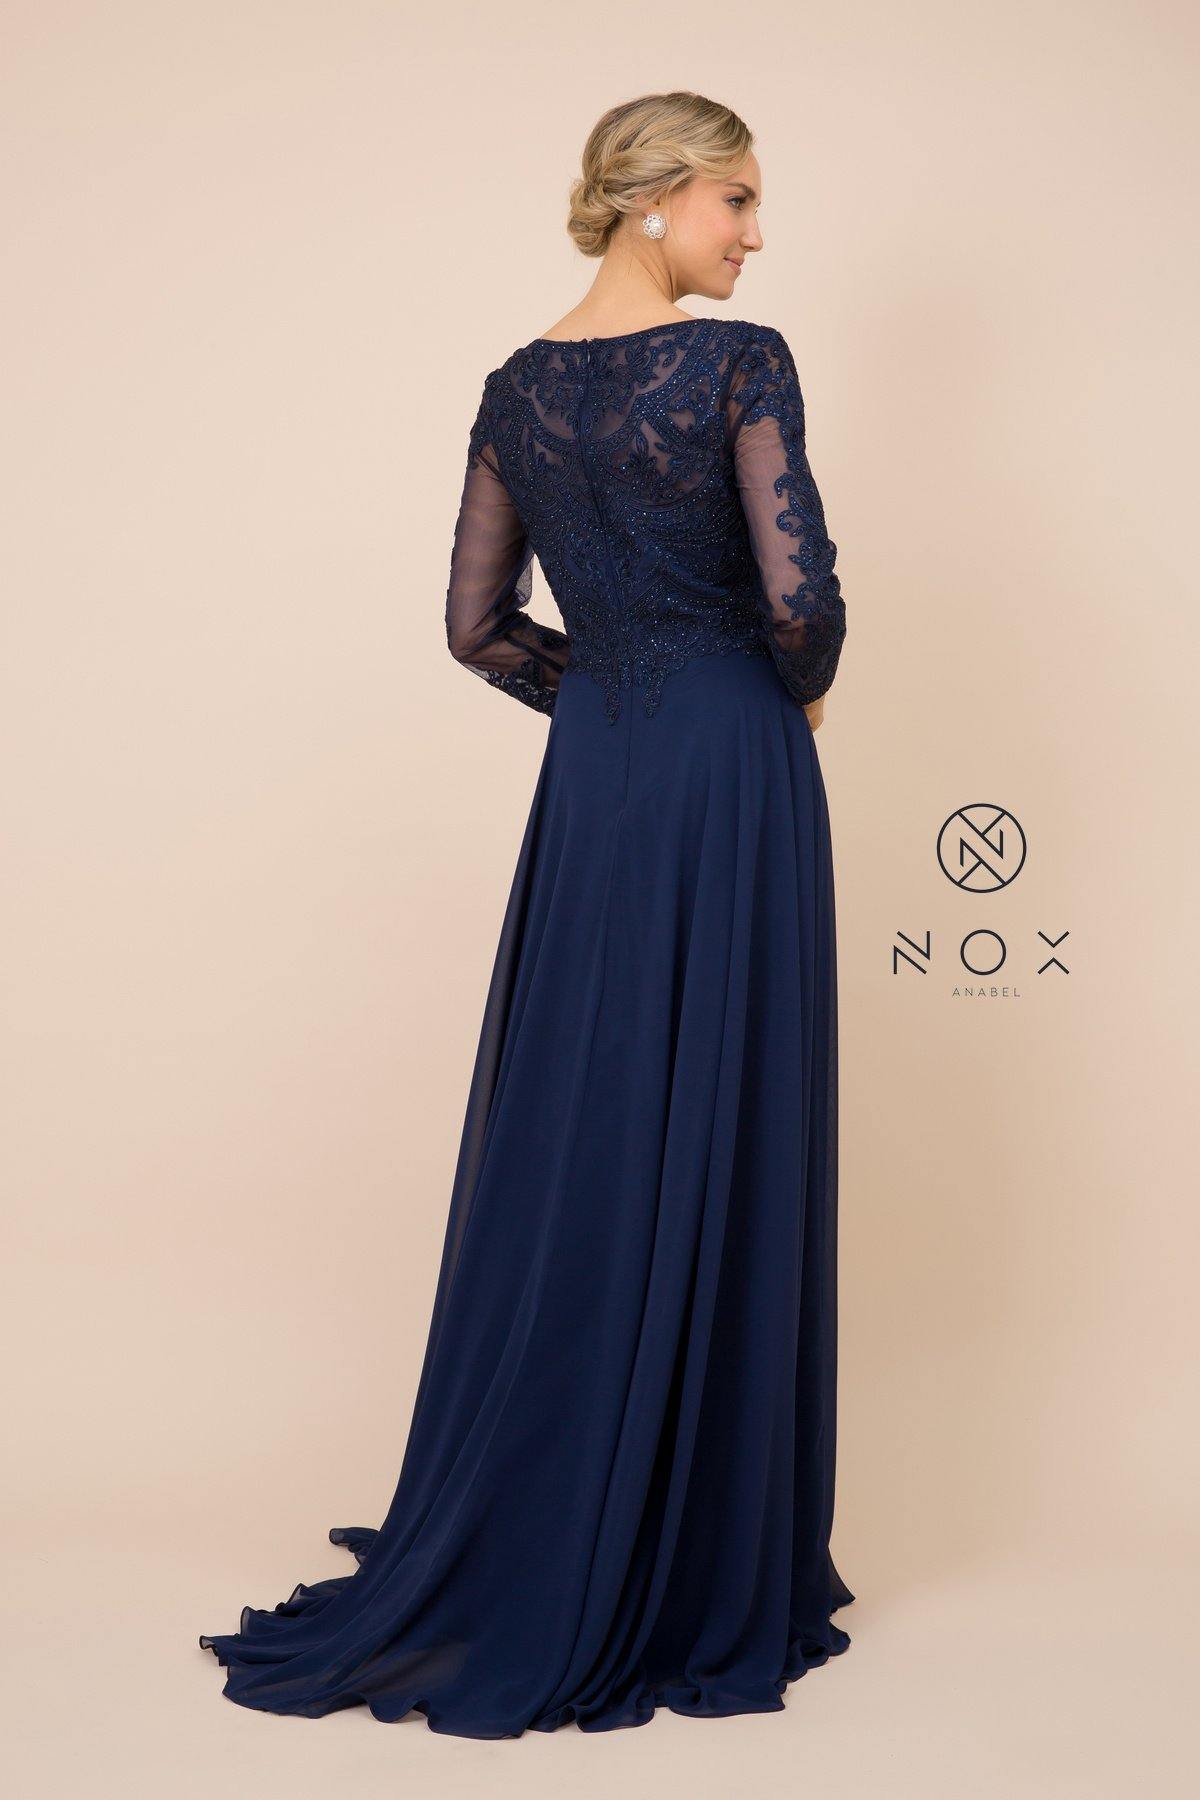 Mother of the Bride Long Dress Sale - The Dress Outlet